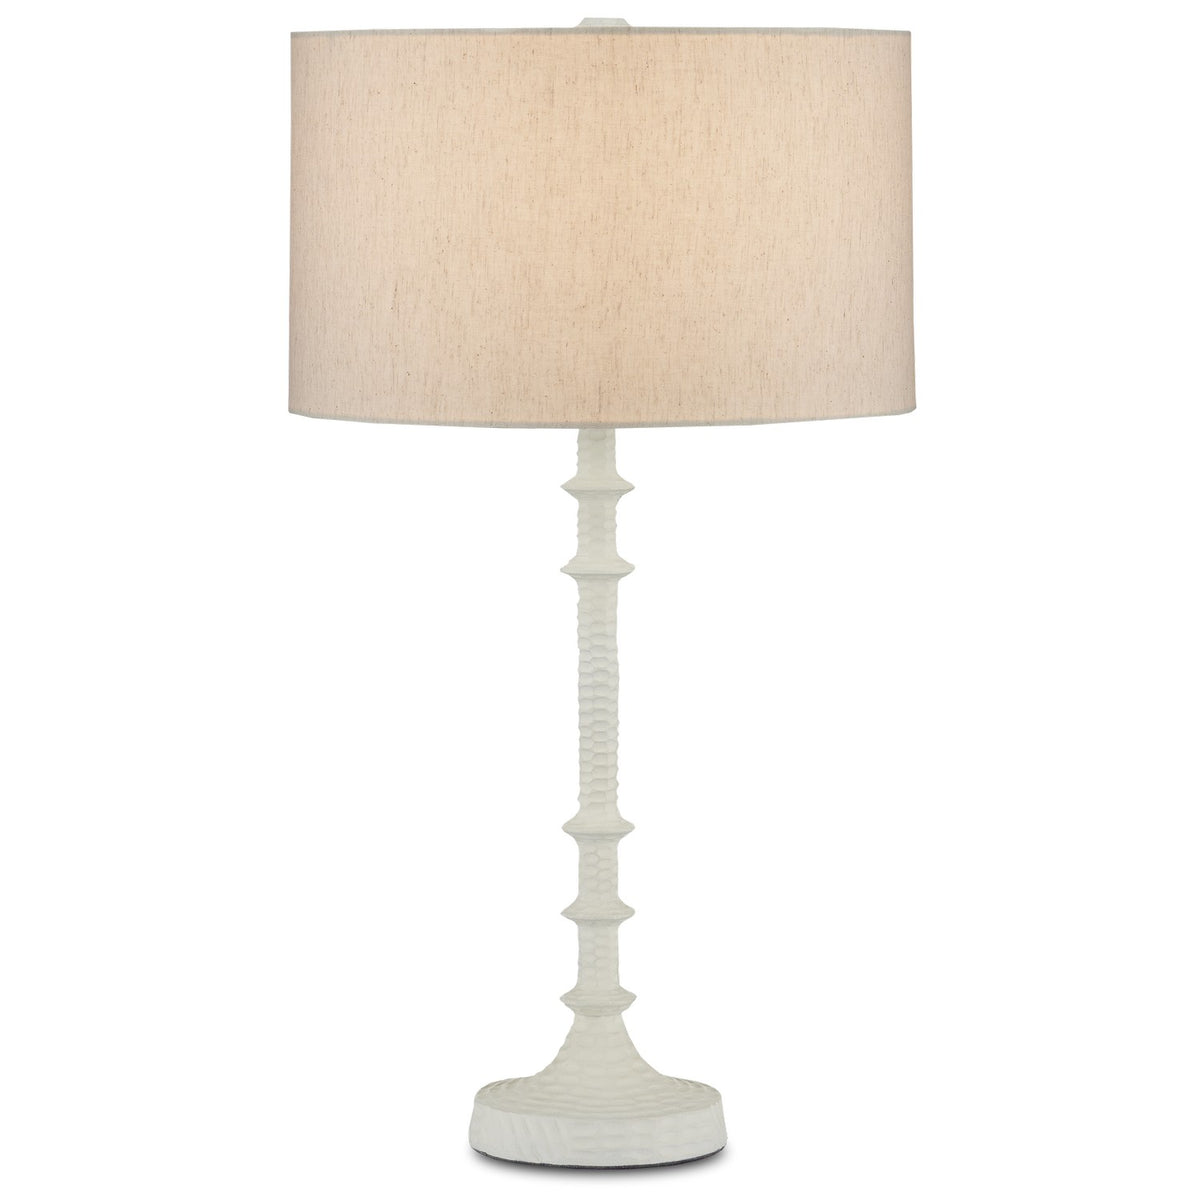 Currey and Company - 6000-0868 - One Light Table Lamp - Gallo - Gesso White